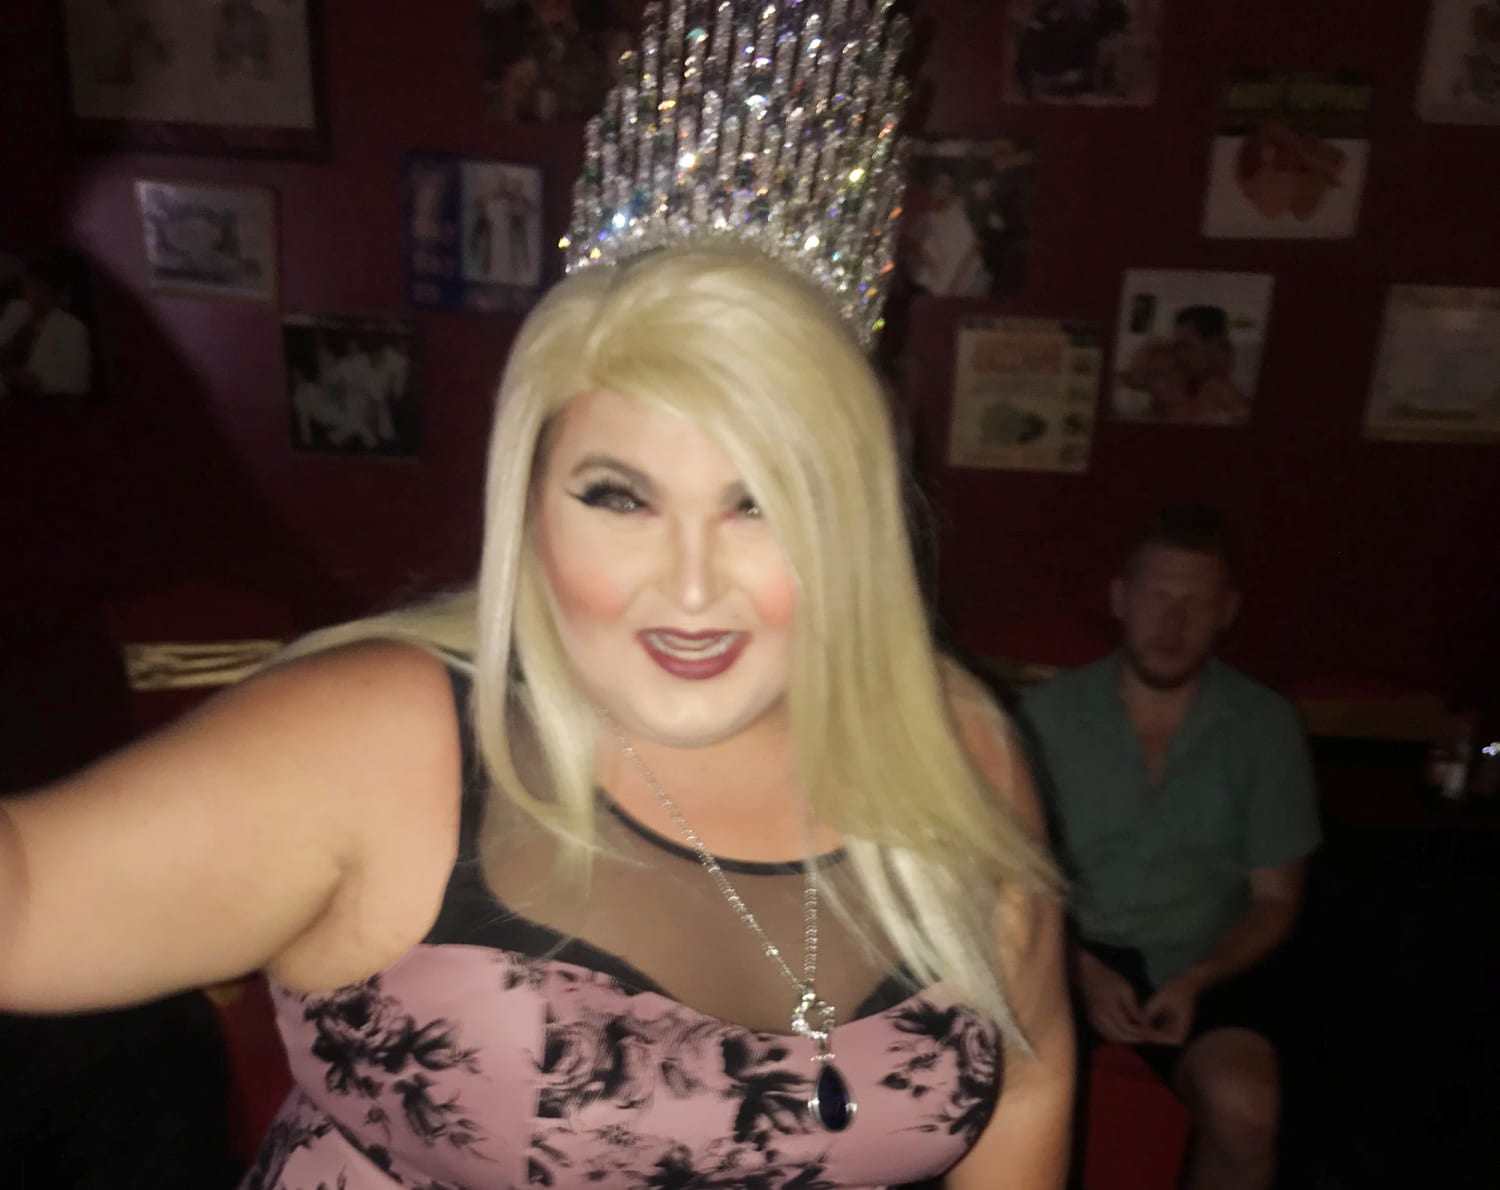 An Alabama drag show was shut down on the 50th anniversary of Stonewall